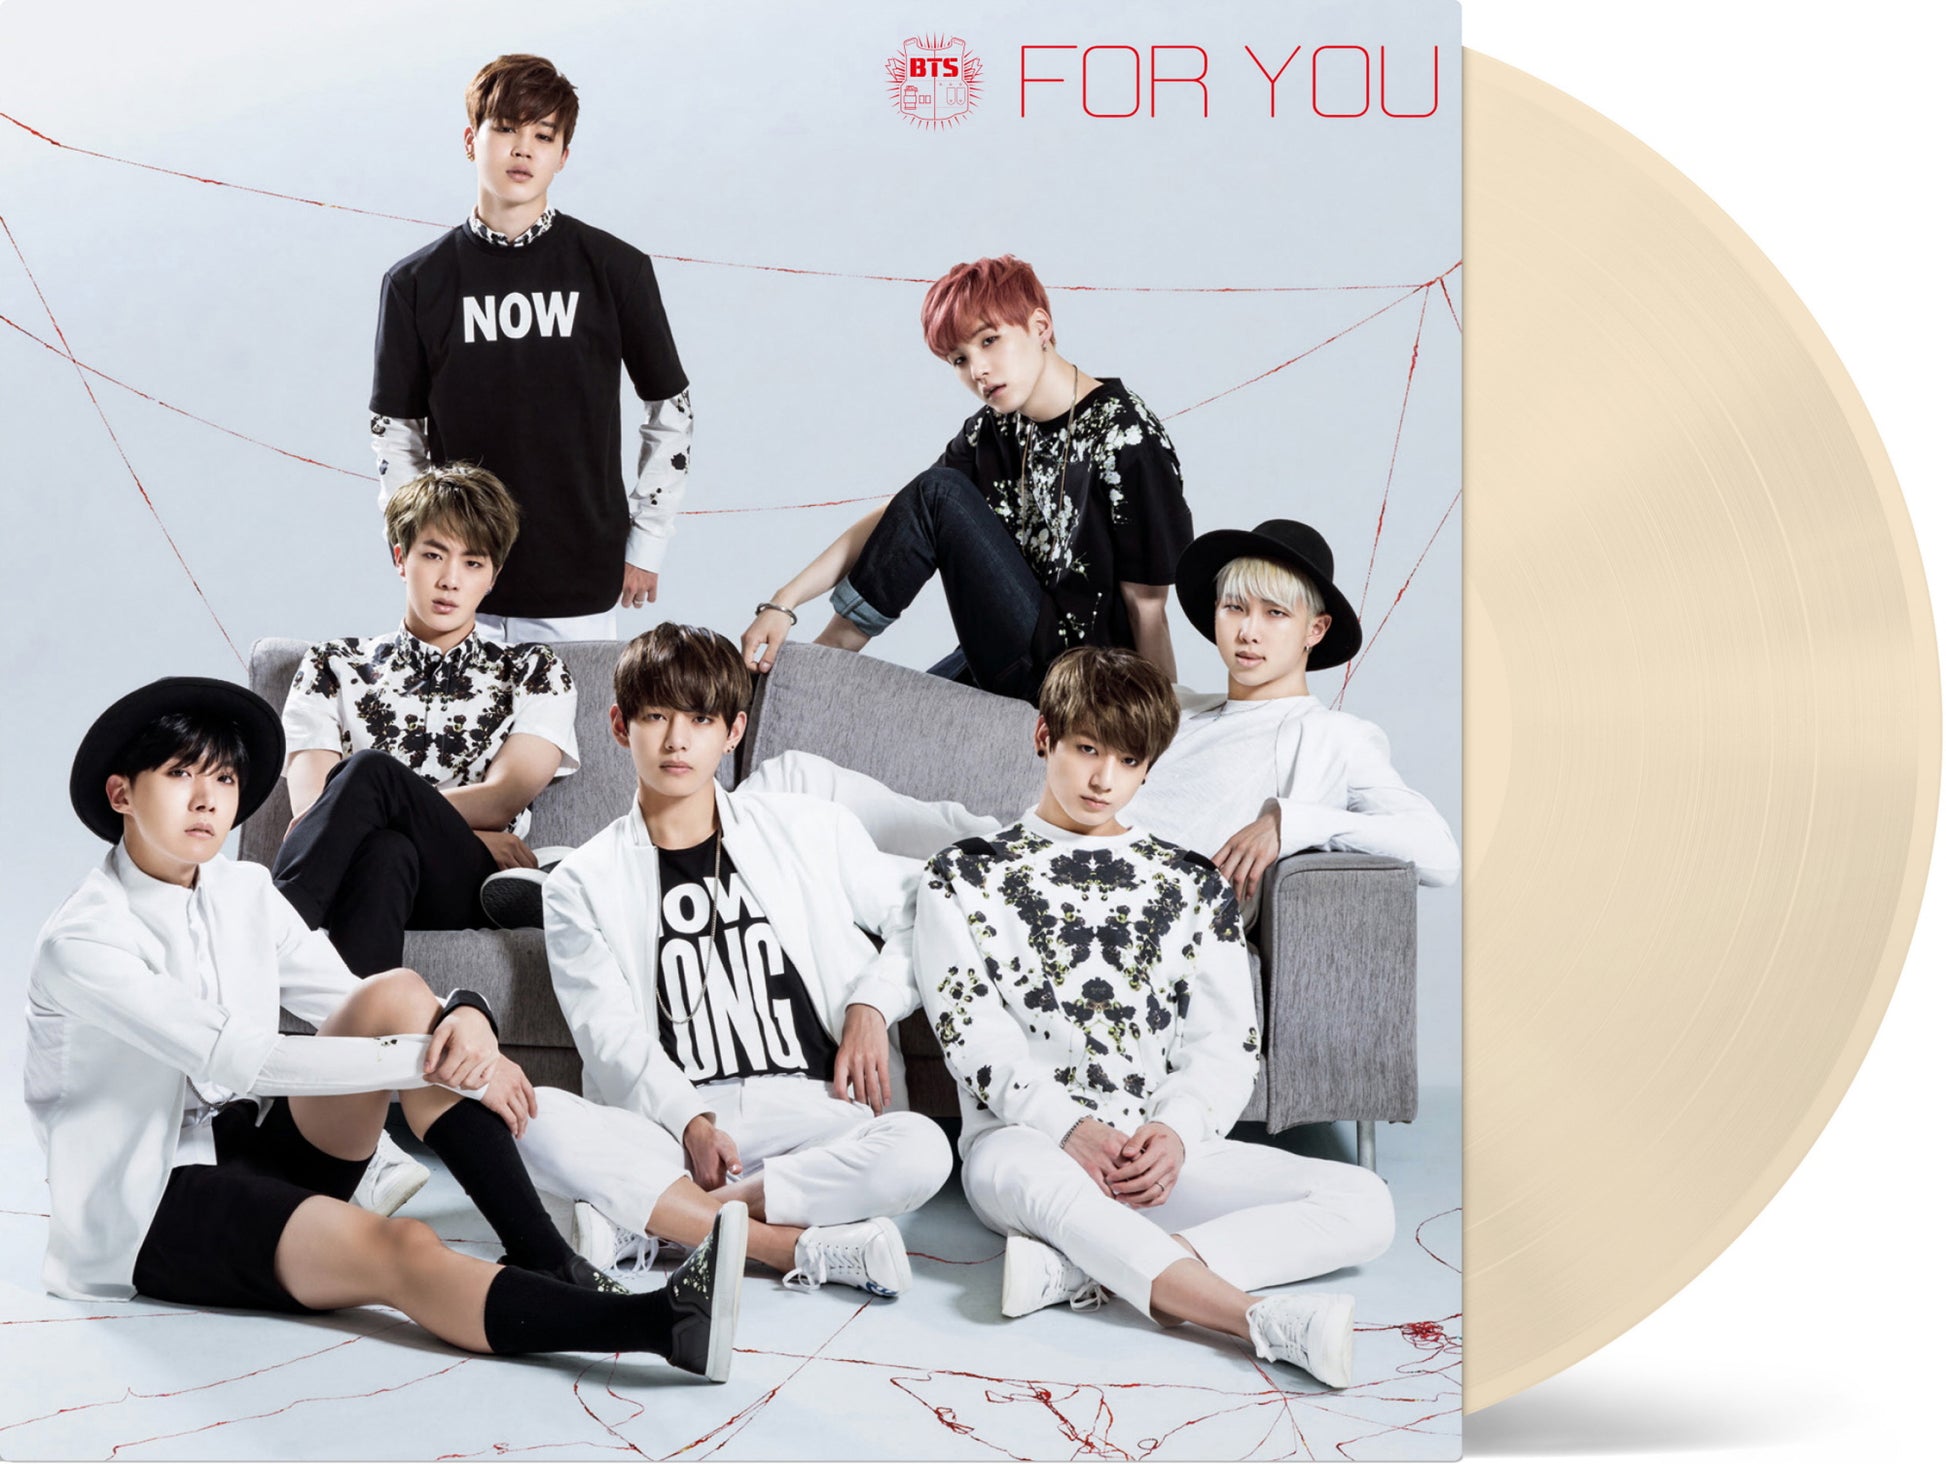 BTS - FOR YOU VINYL LIMITED EDITION